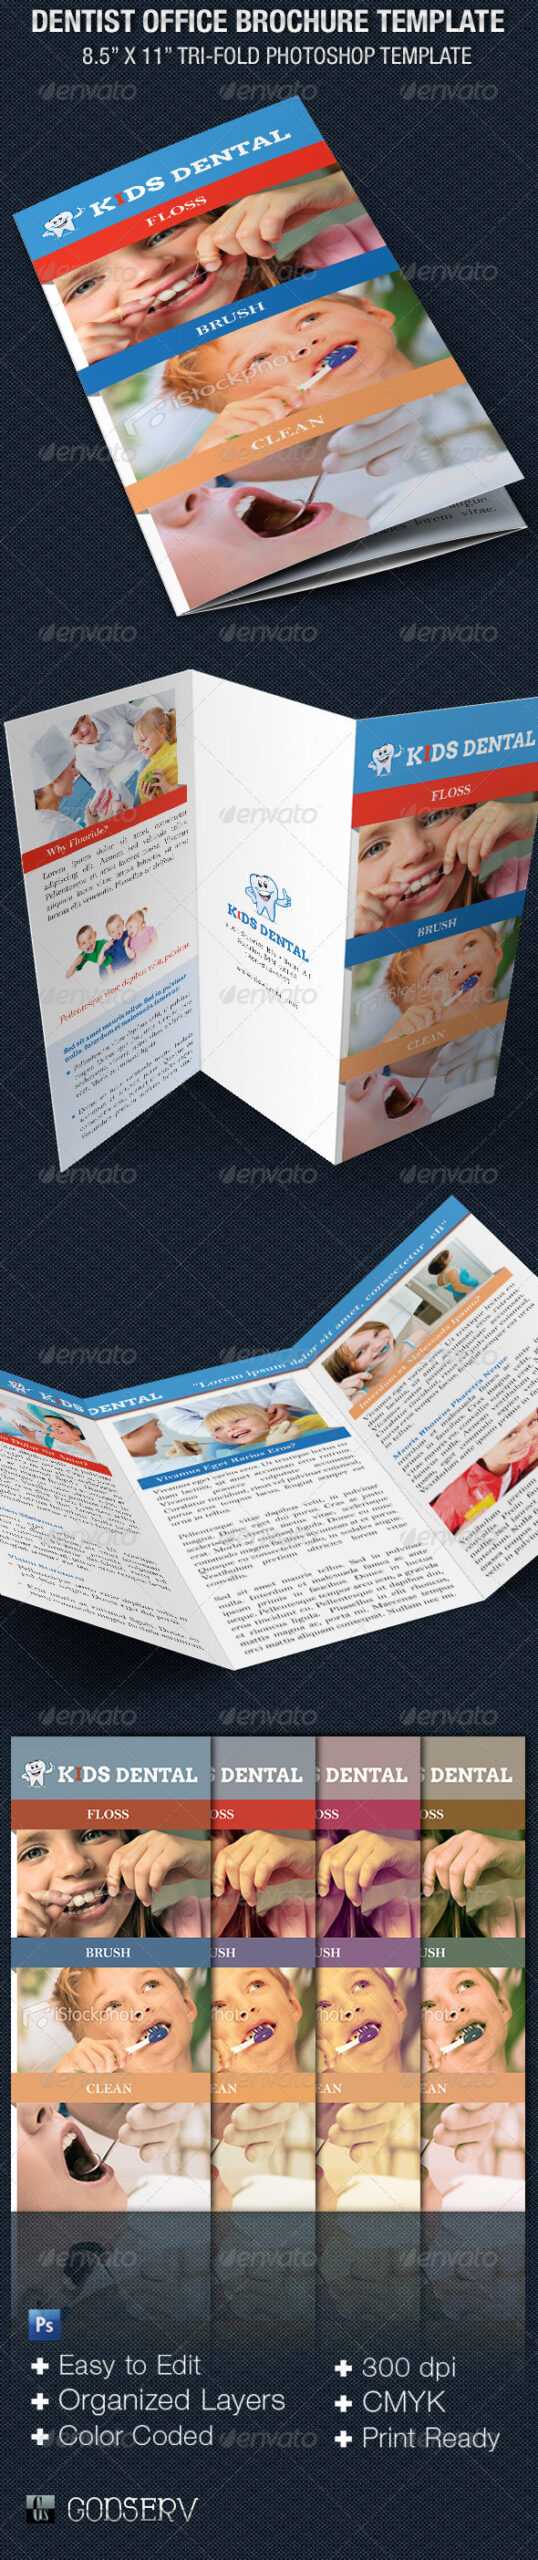 Pharmacy Theme Stationery And Design Templates From Graphicriver In Medical Office Brochure Templates